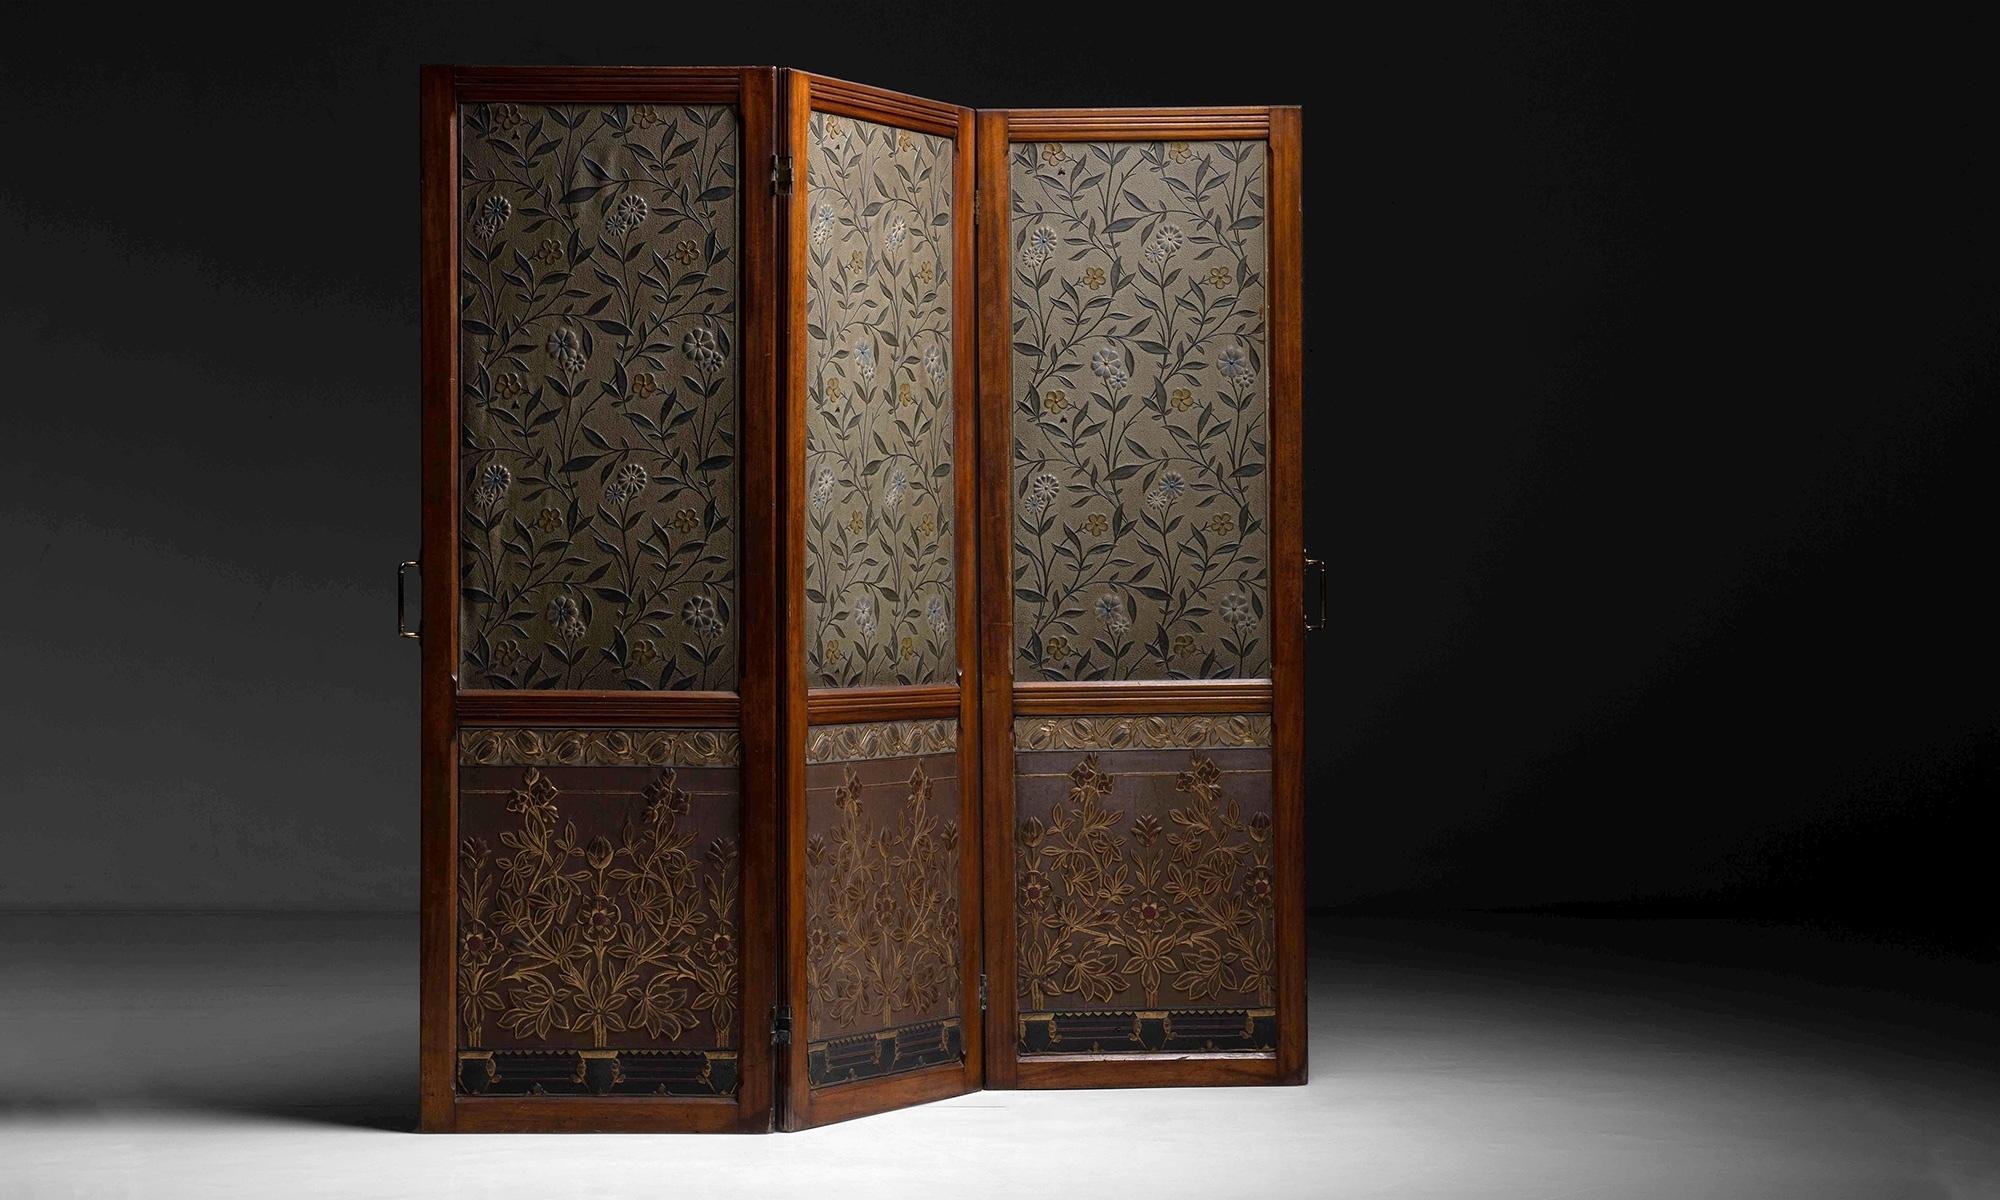 Decorative Mahogany Screen

England circa 1900

Aesthetic Movement Screen with Lincrusta panels in the manner of Sir Christopher Dresser (1834-1904).

Measures: 65.5” Long ( as shown ) x 72” height.